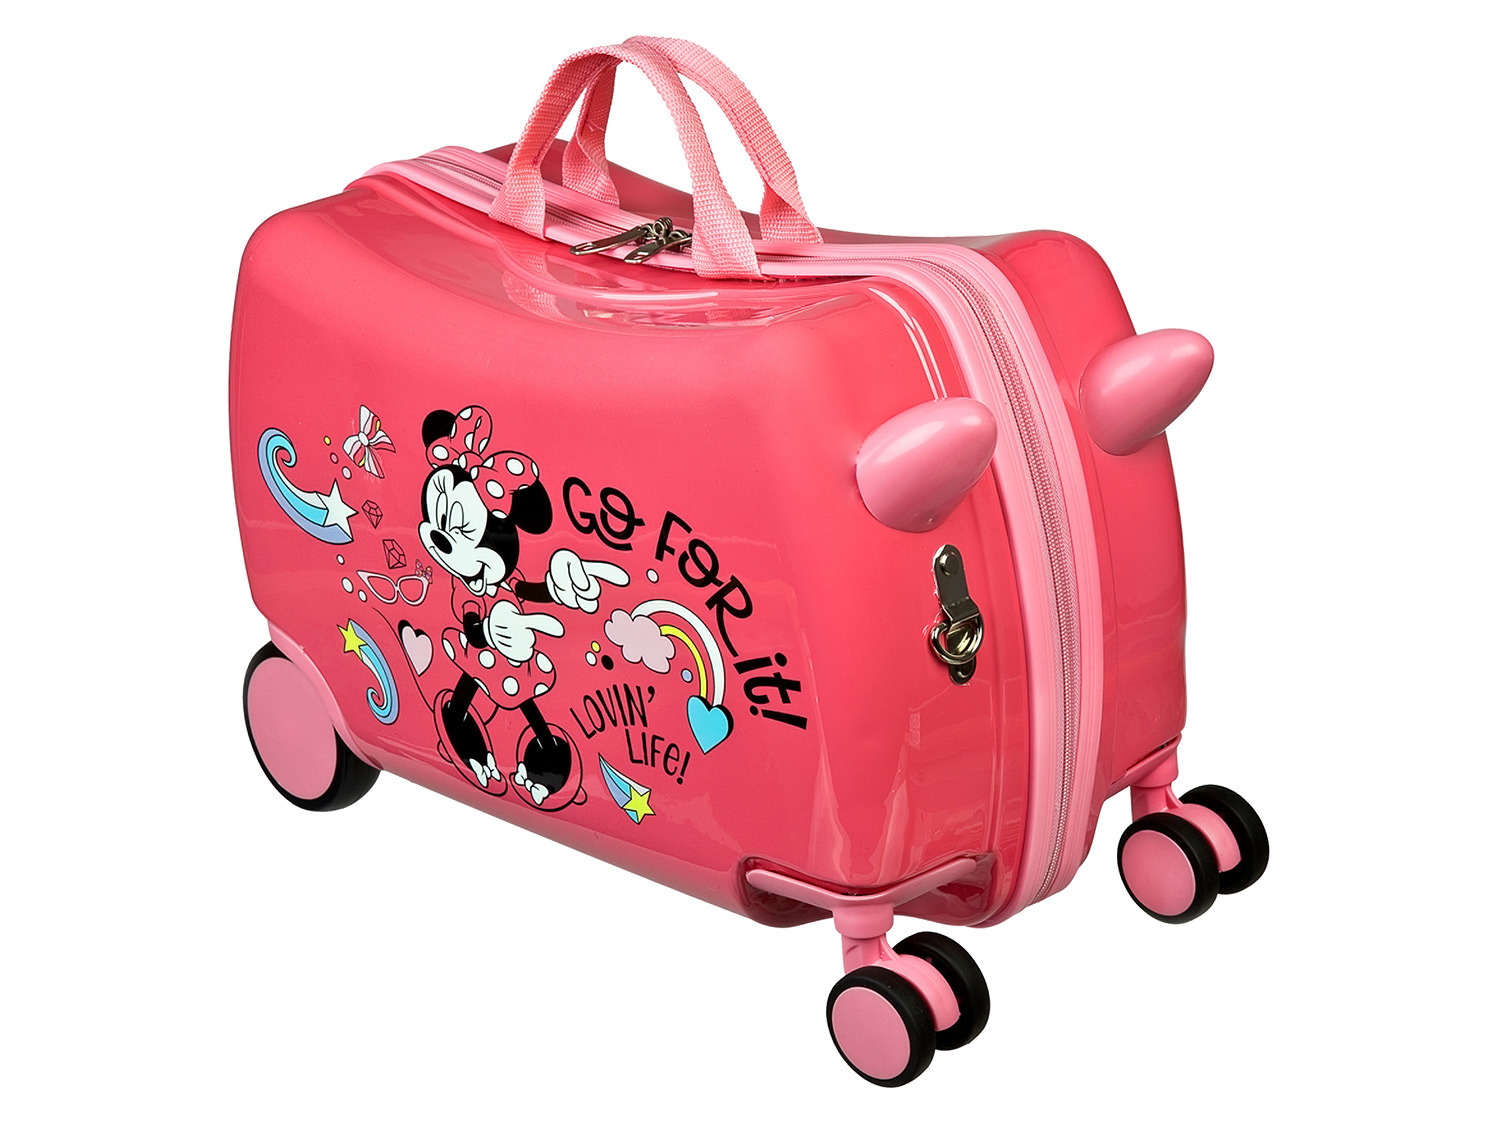 Undercover »Minnie Mouse« Polycarbonat Ride-on | LIDL